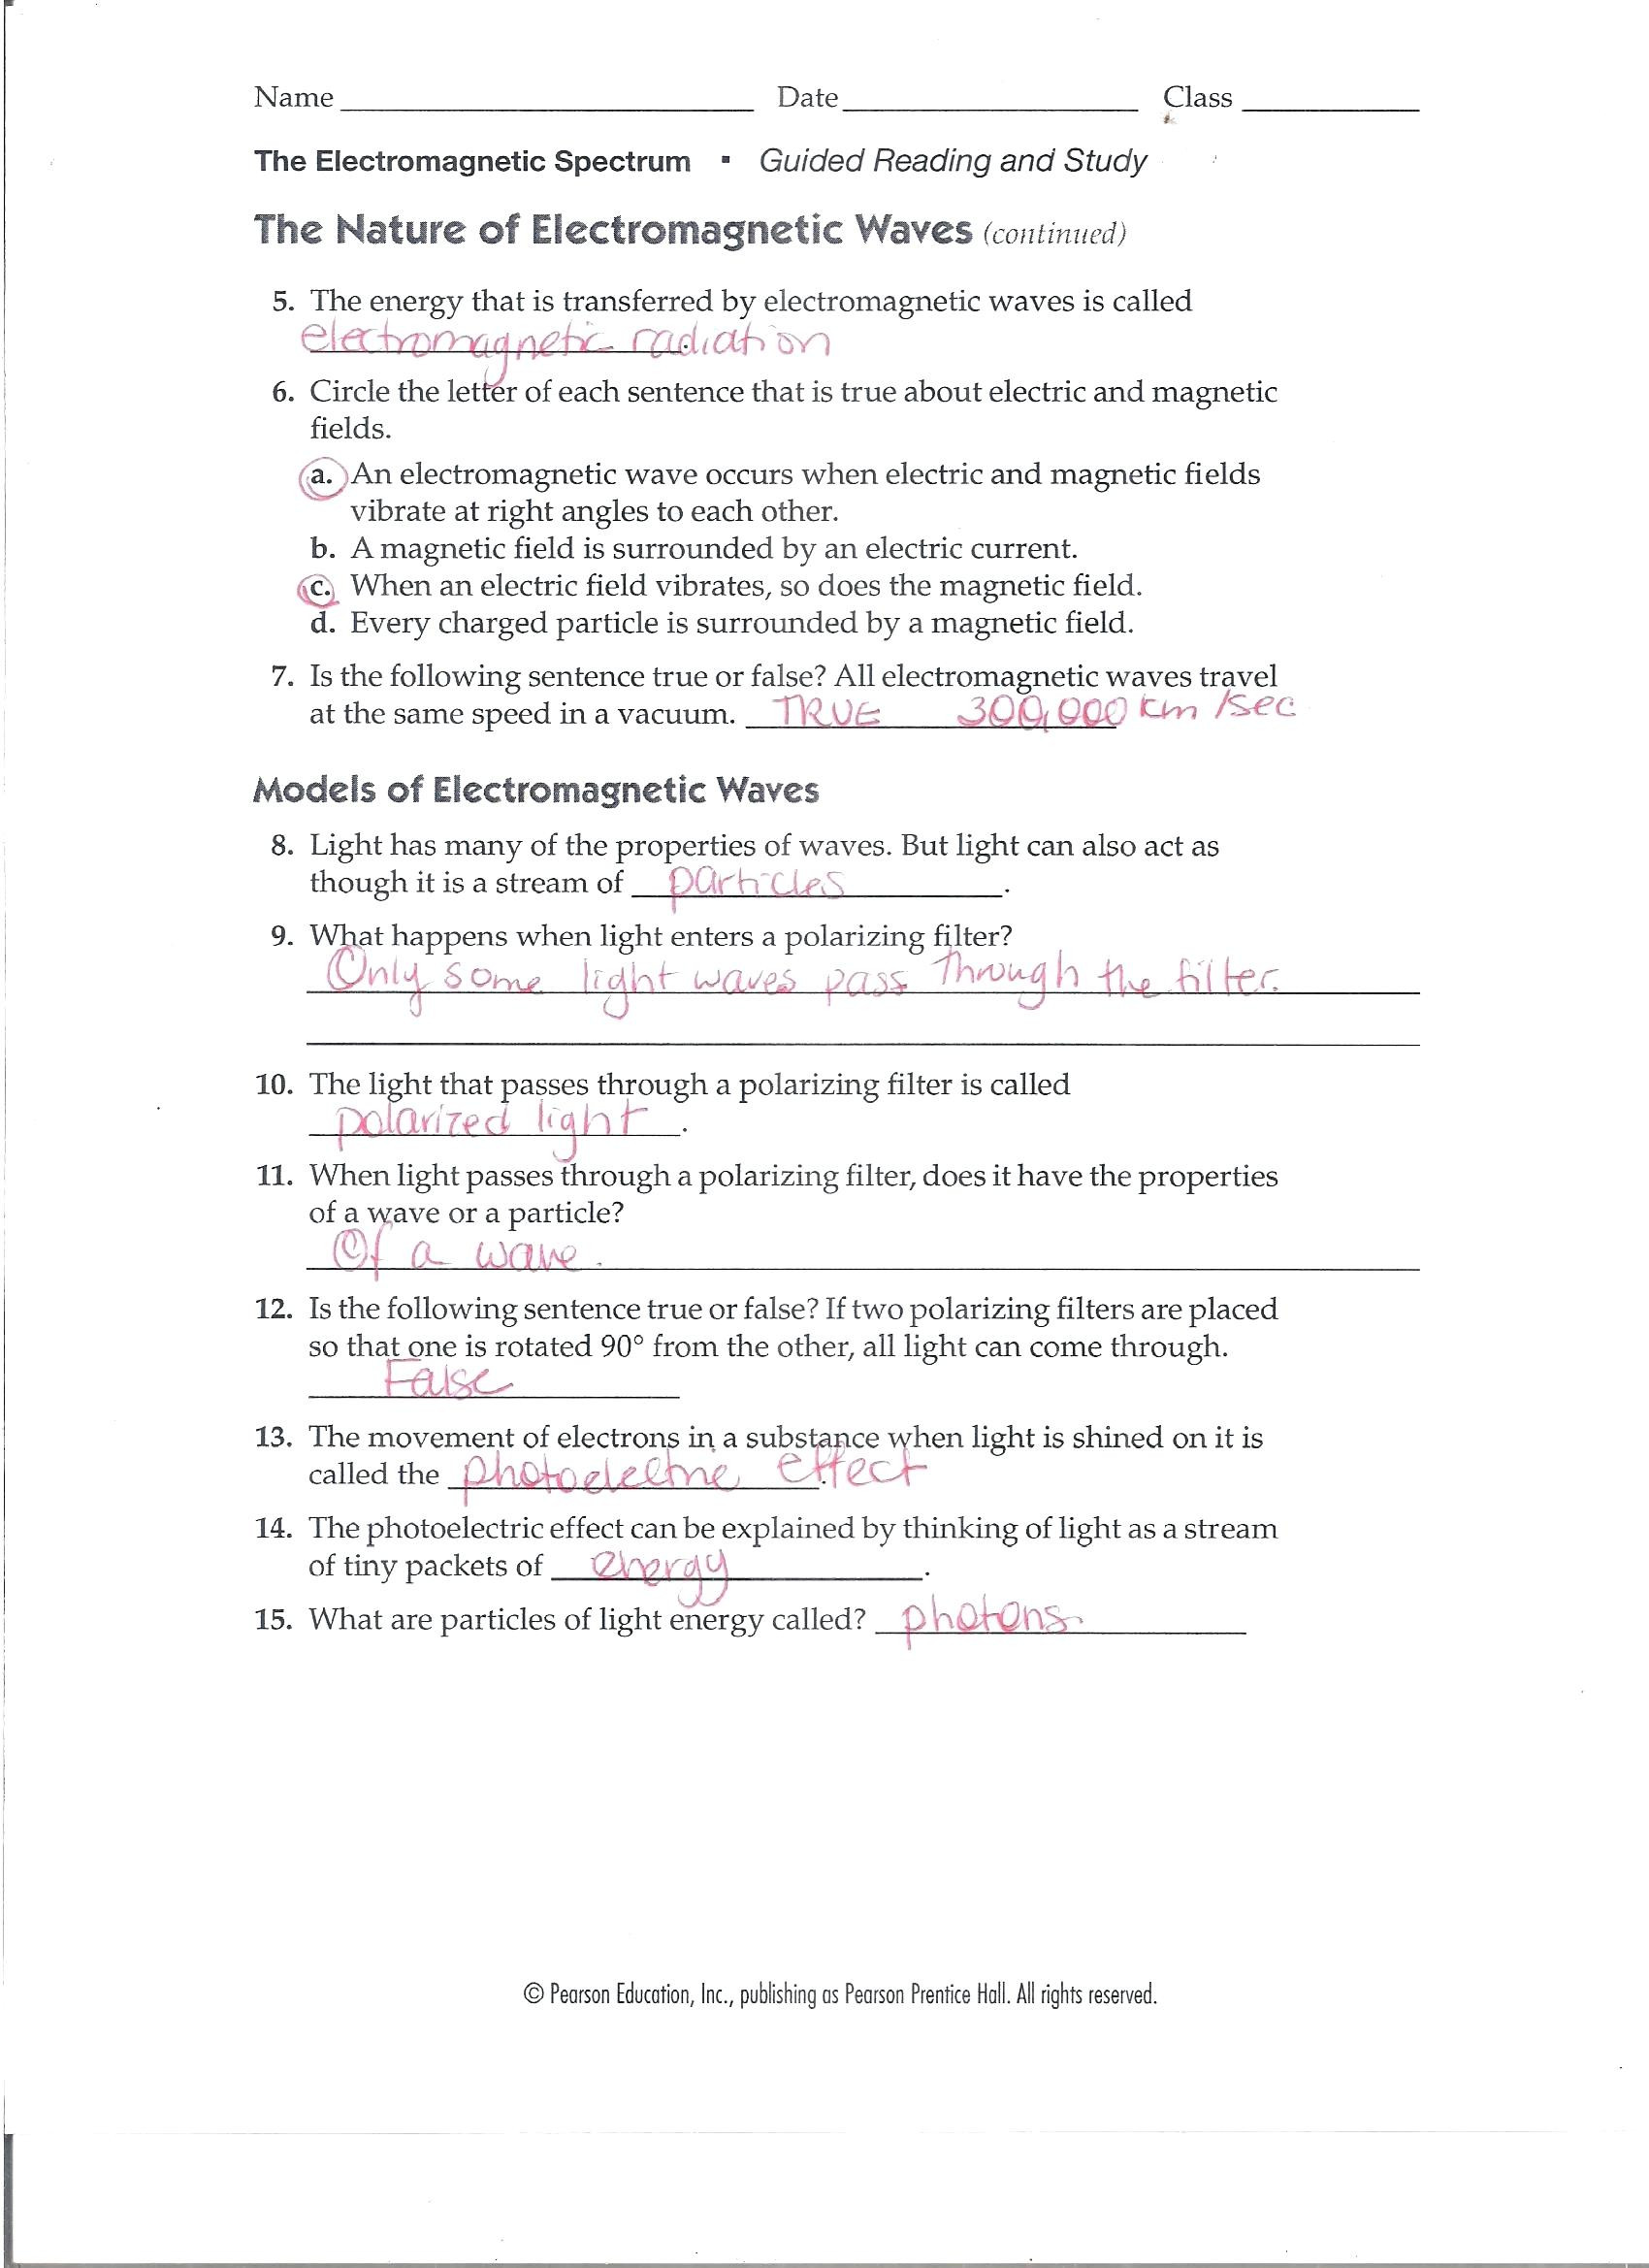 The Electromagnetic Spectrum Worksheet Answers Overview Waves Worksheet Answers Promotiontablecovers